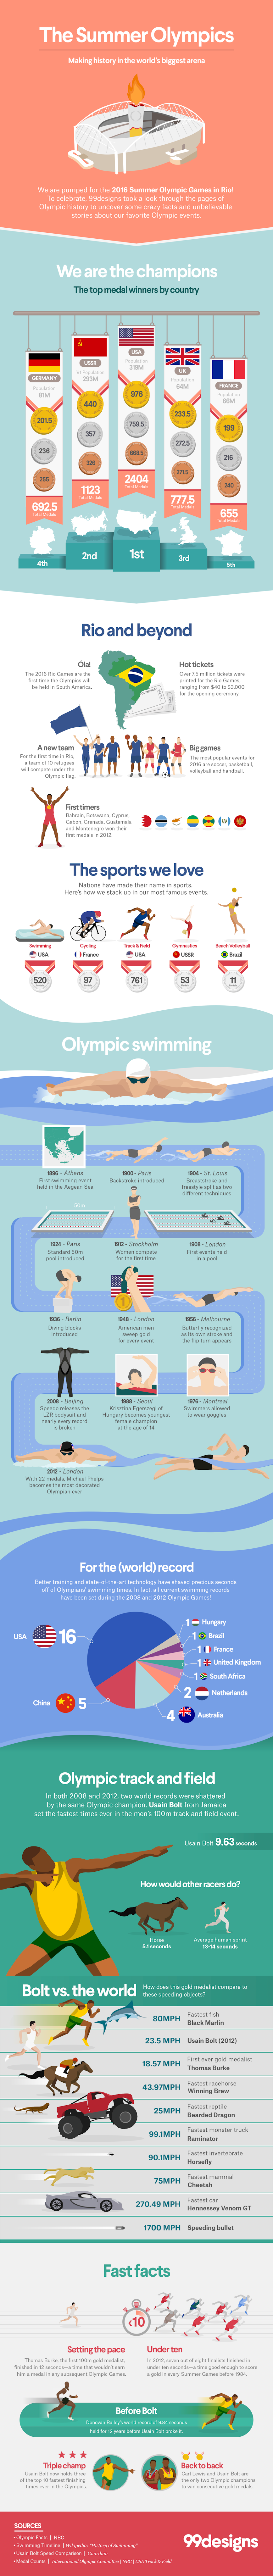 Olympic facts infographic